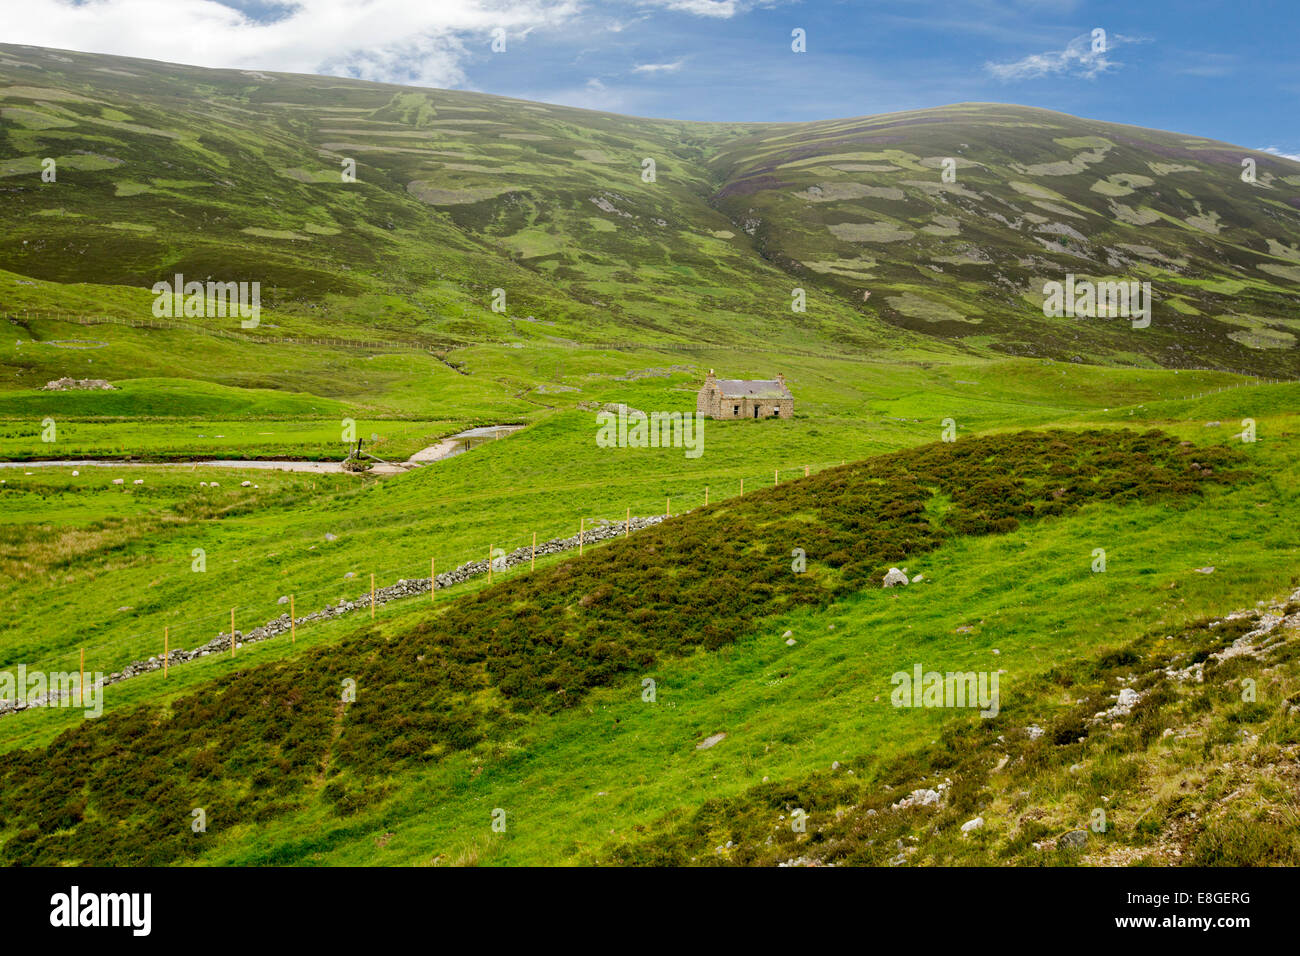 Spectacular landscape in Scottish highlands with deserted cottage in valley surrounded by mountains in Cairngorms National Park Stock Photo